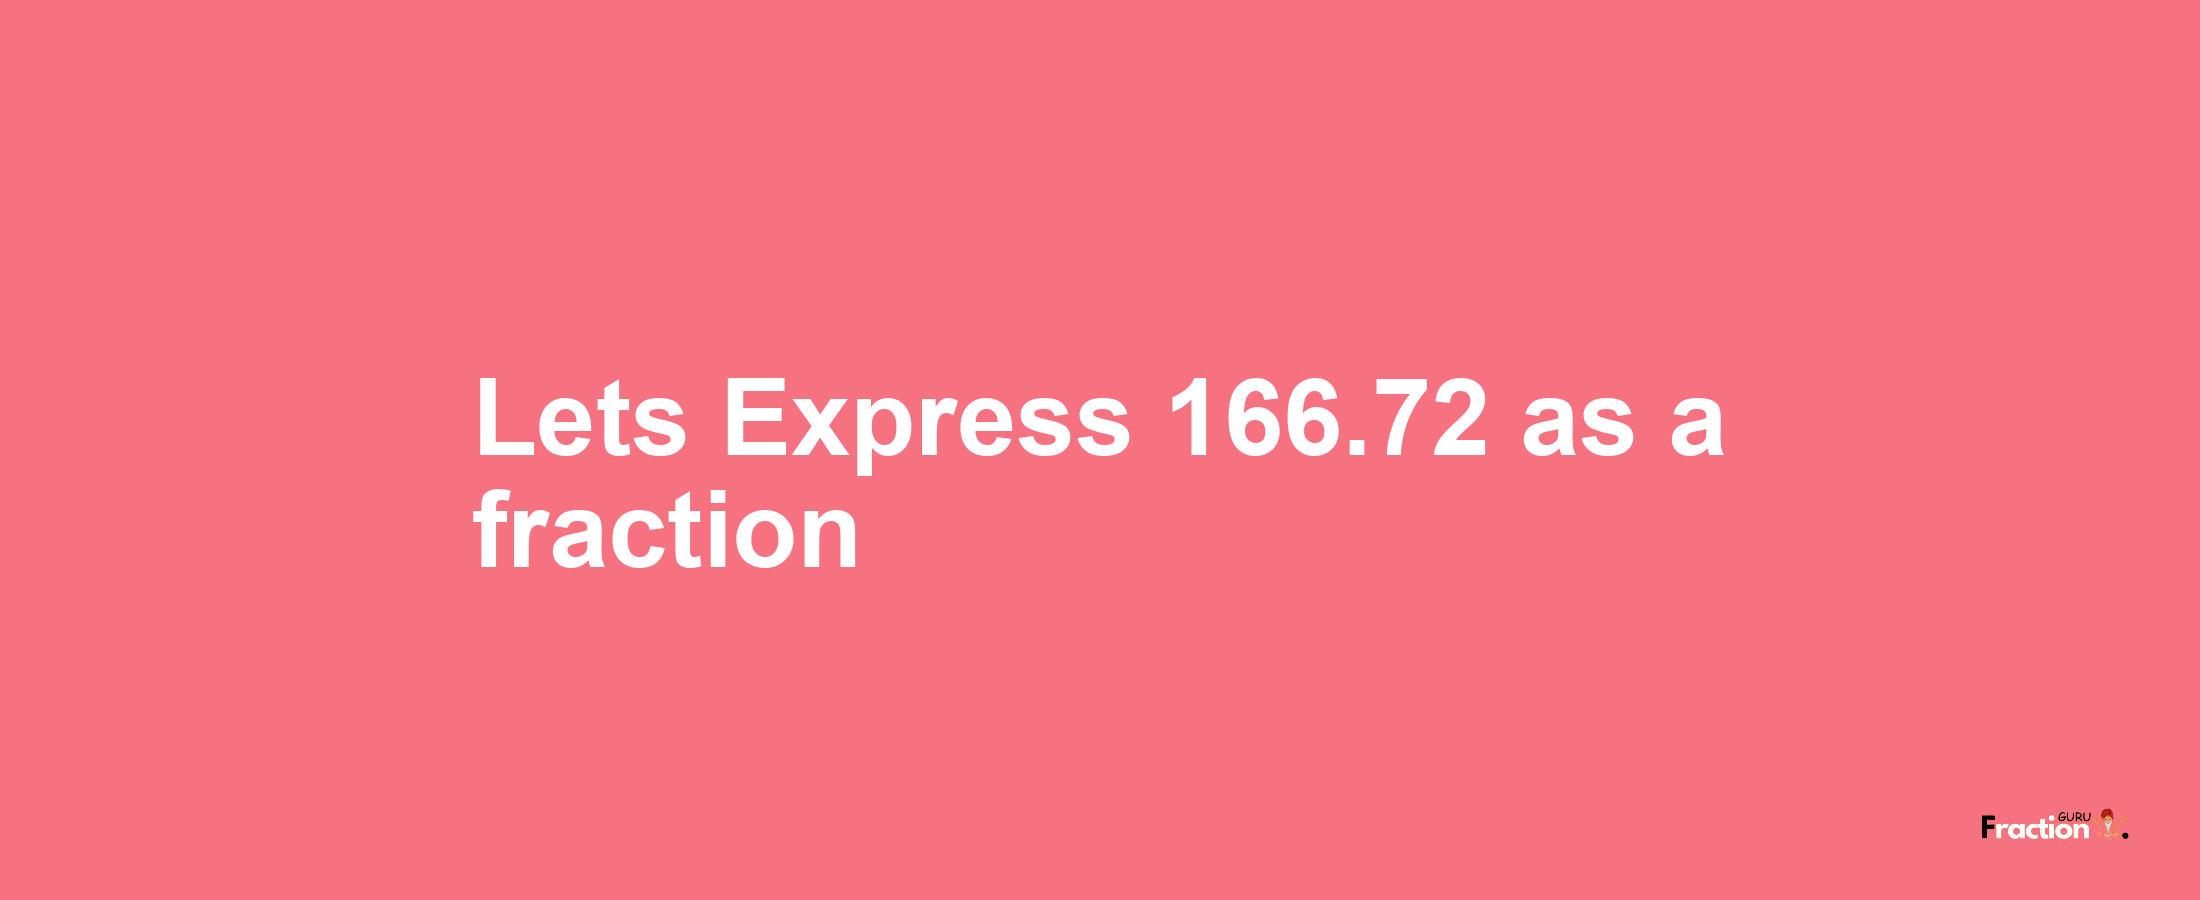 Lets Express 166.72 as afraction